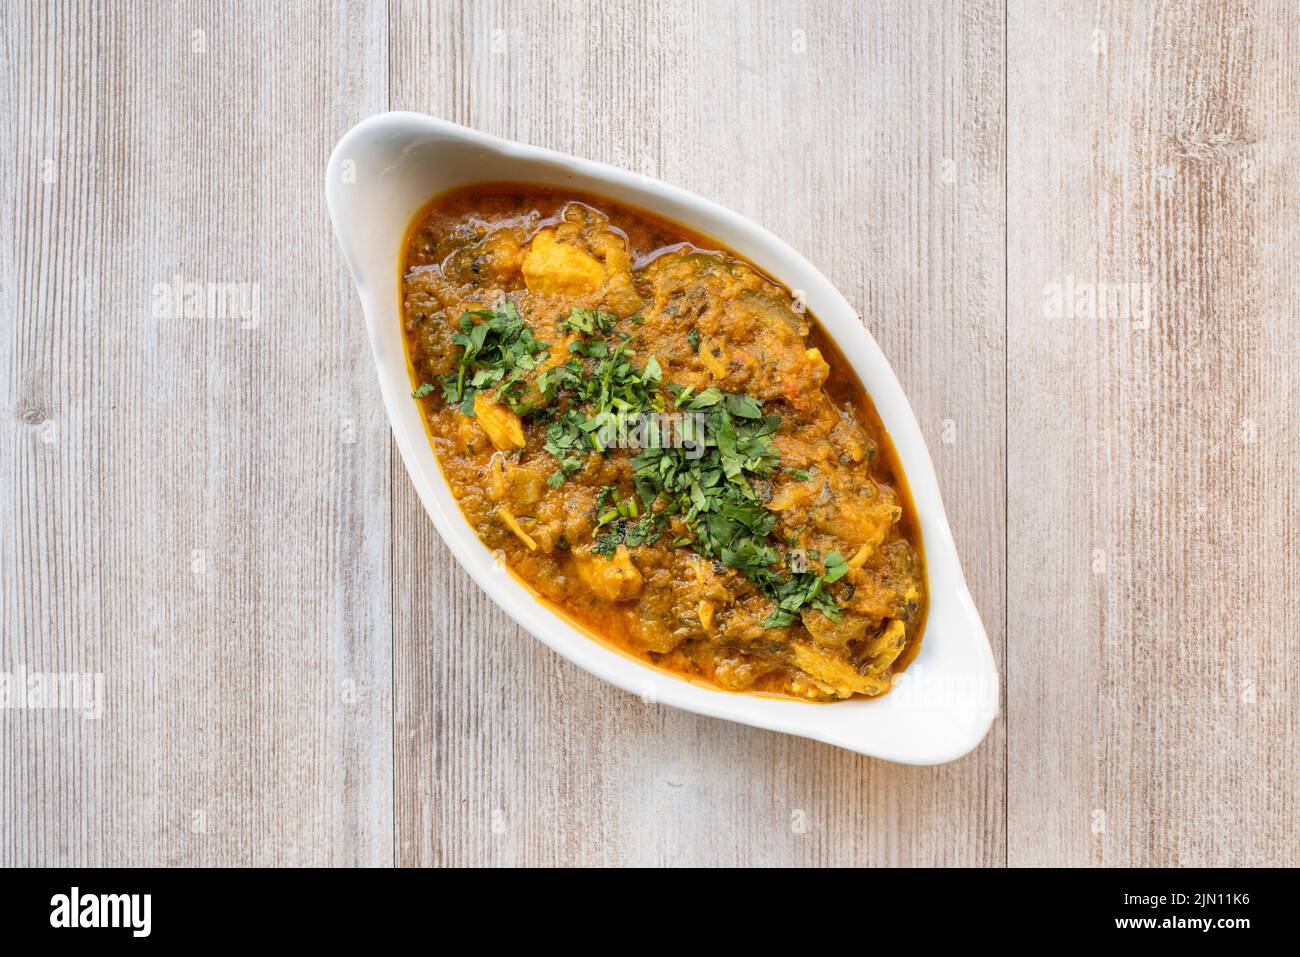 Doncaster, UK - 2019 Mar 21: Chicken Bhuna from Goa Indian Stock Photo